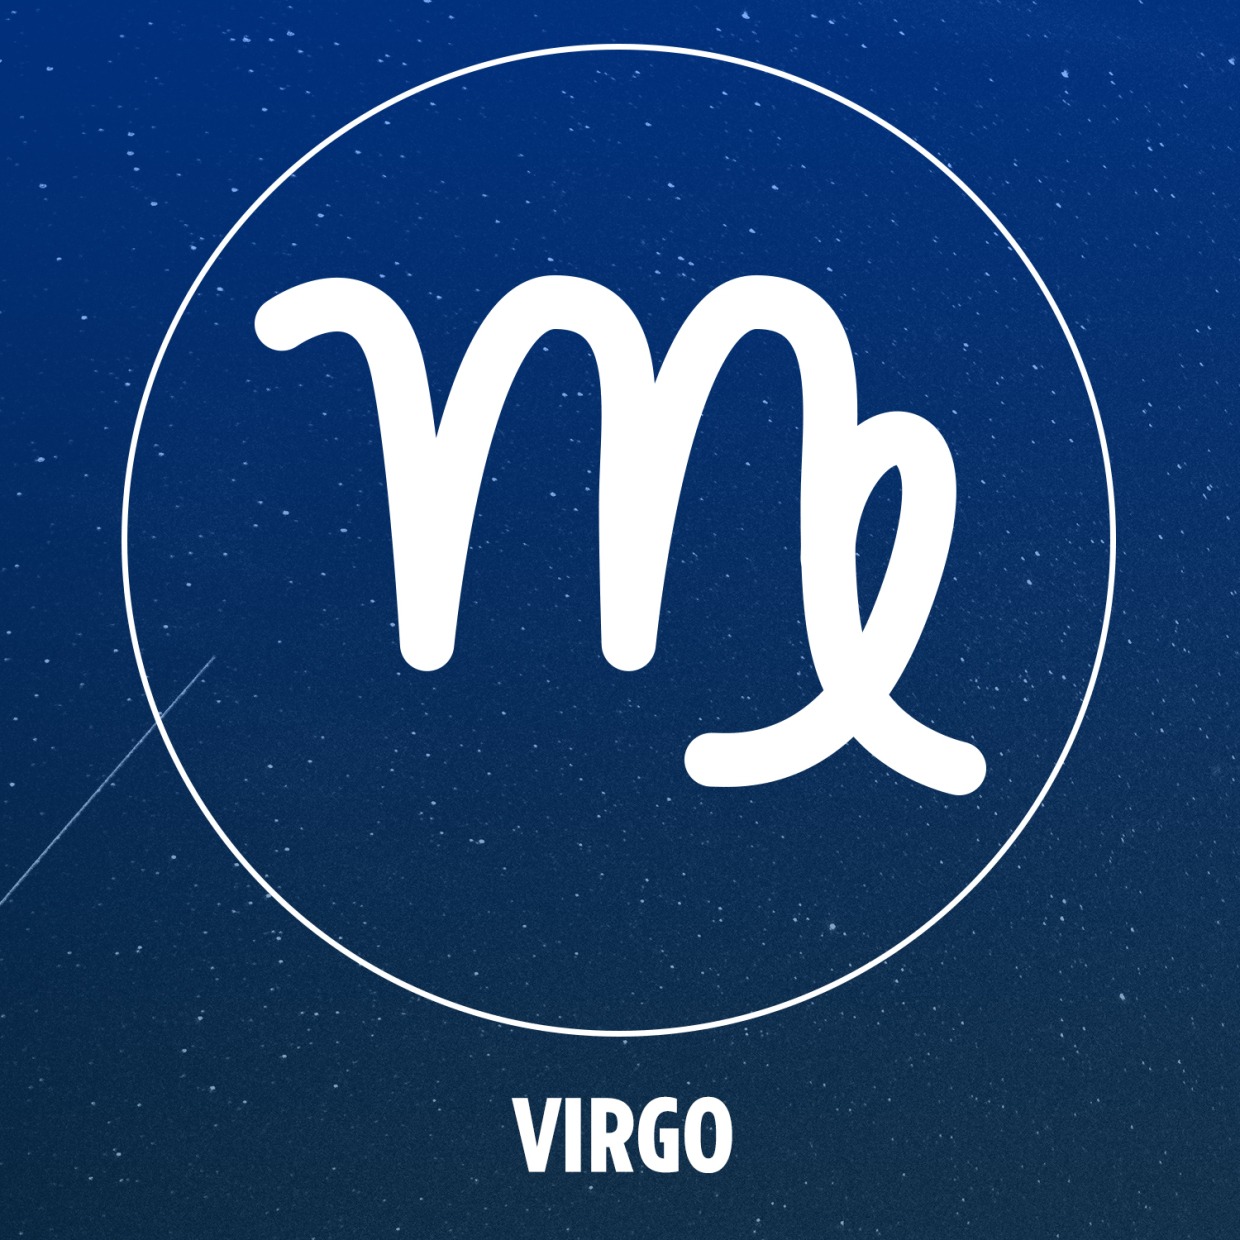 virgo facts, virgo zodiac sign, facts about virgo, virgo sign, about virgo, virgo symbol, facts about virgos, virgo star sign, virgo zodiac sign facts